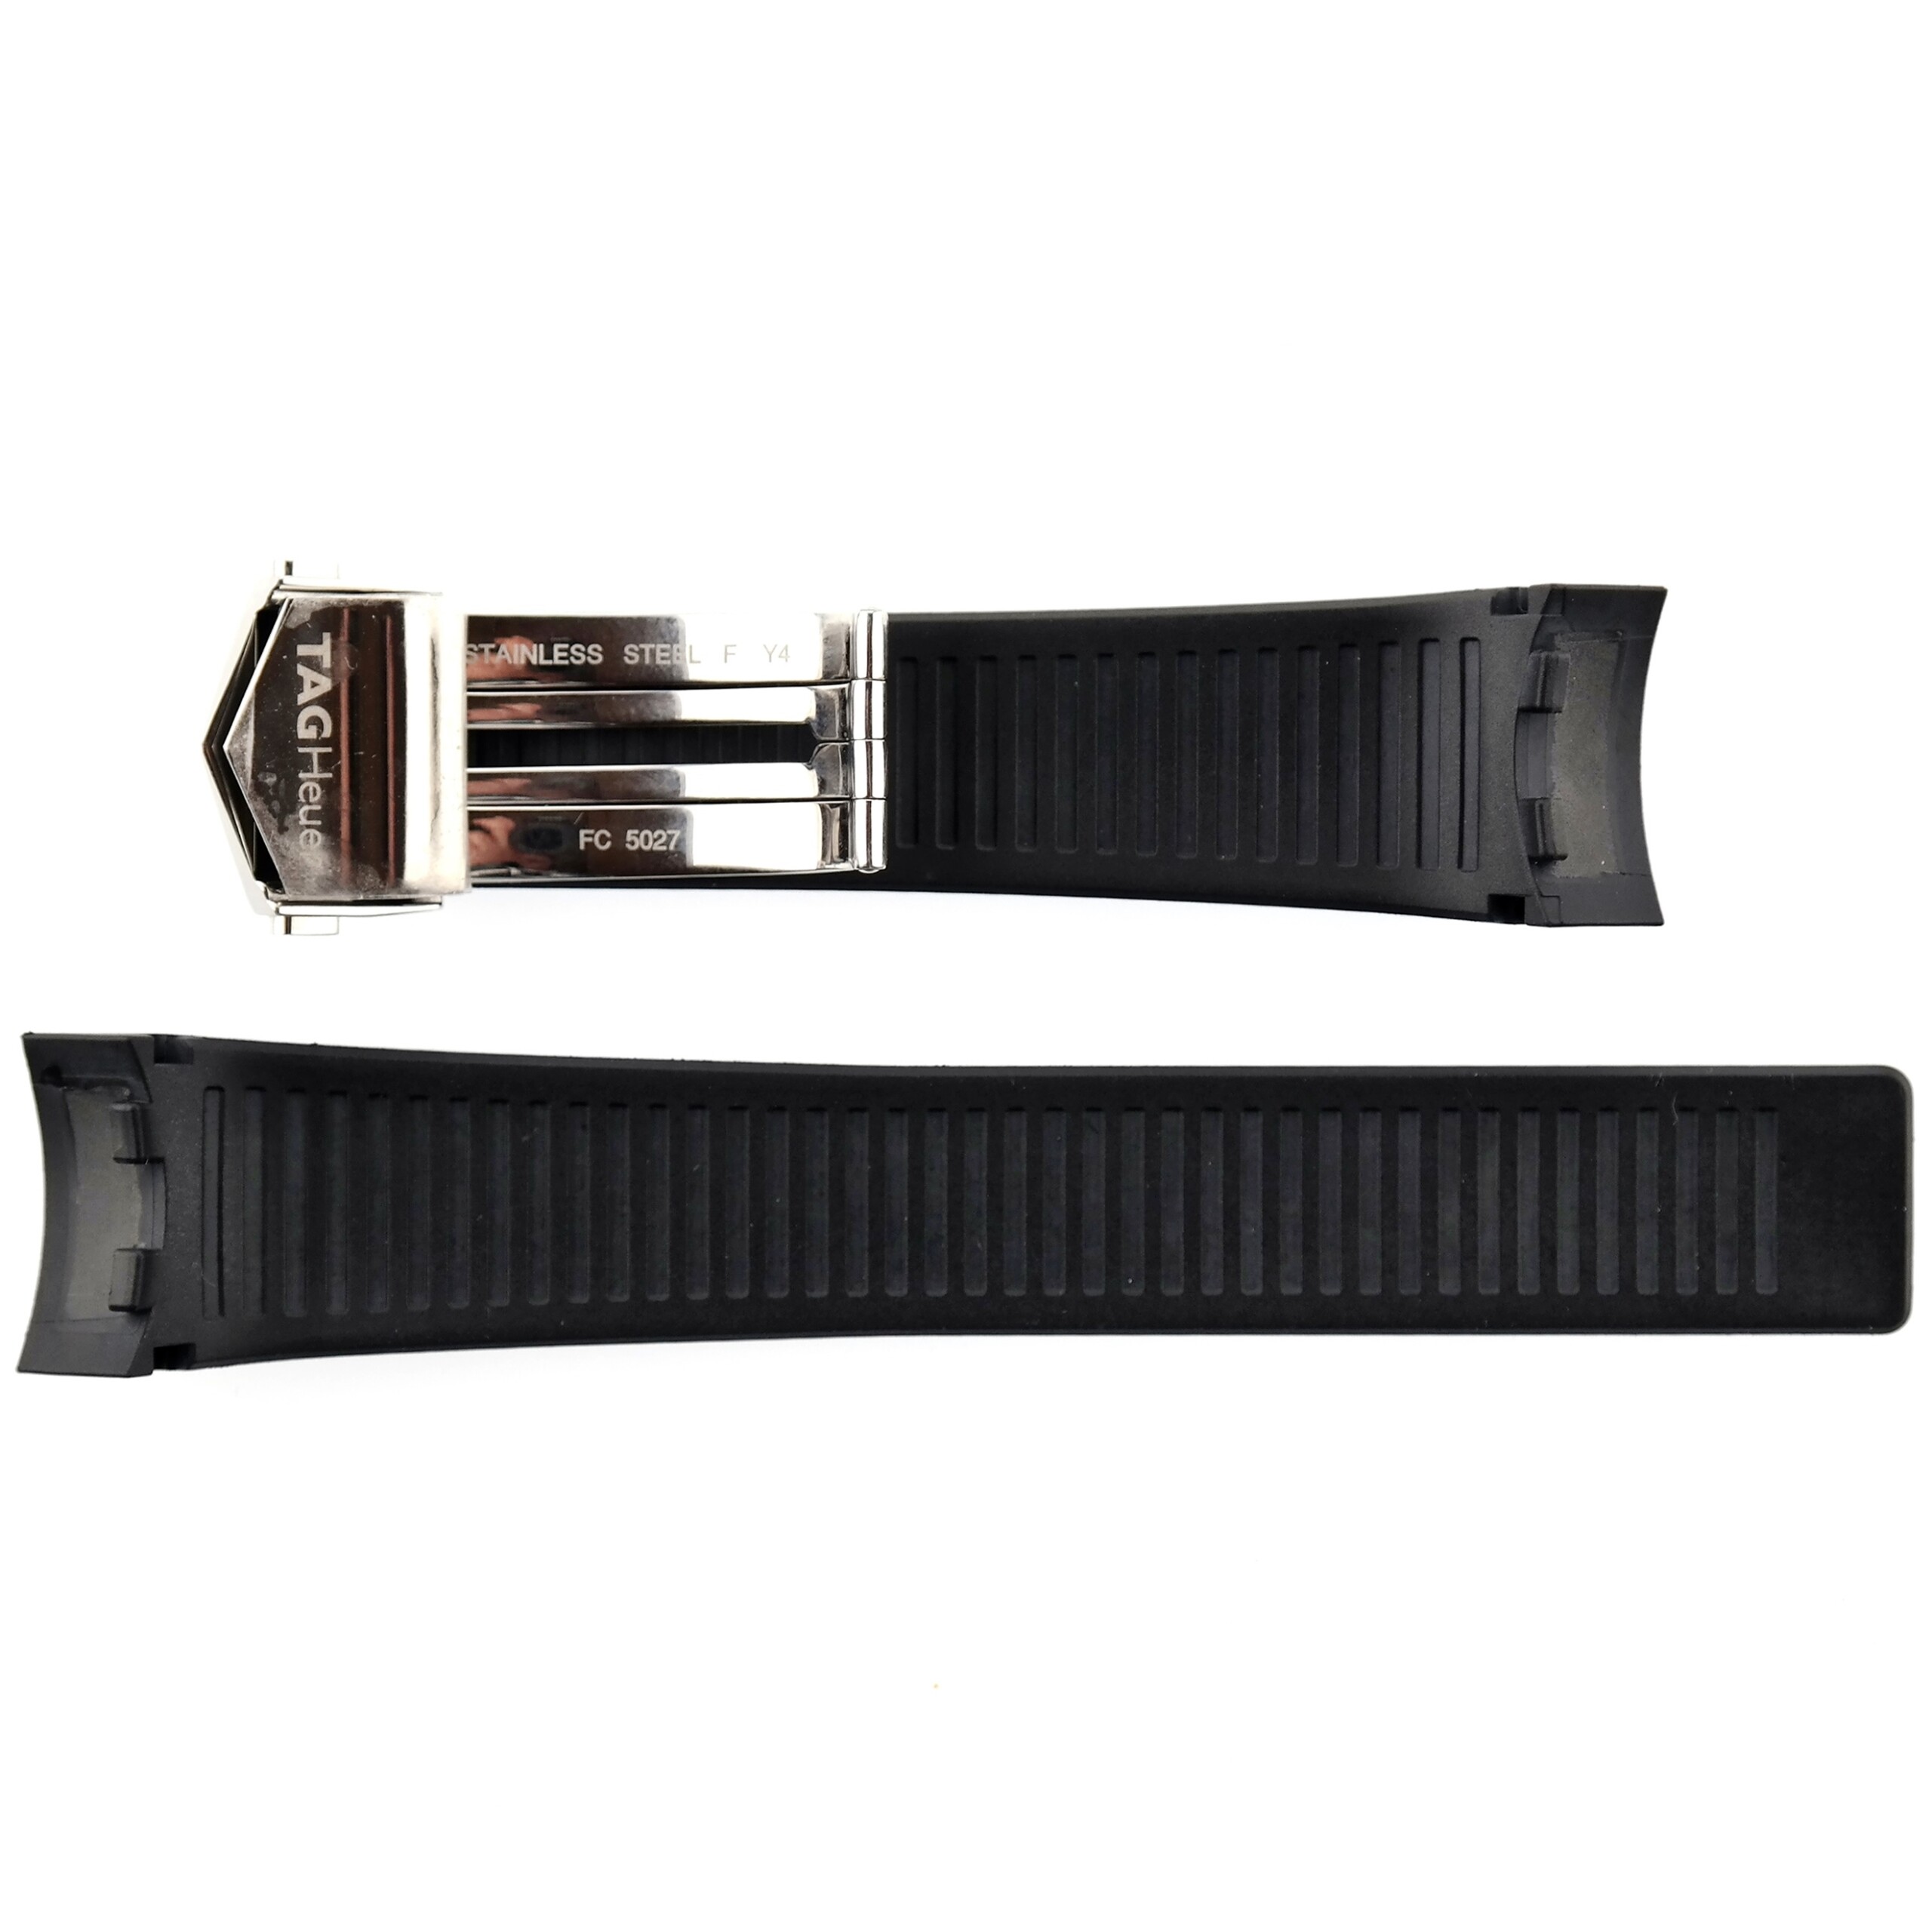 Authentic TAG Heuer SLR CAG701x - Rubber Watch Strap - FT6009/FC5027